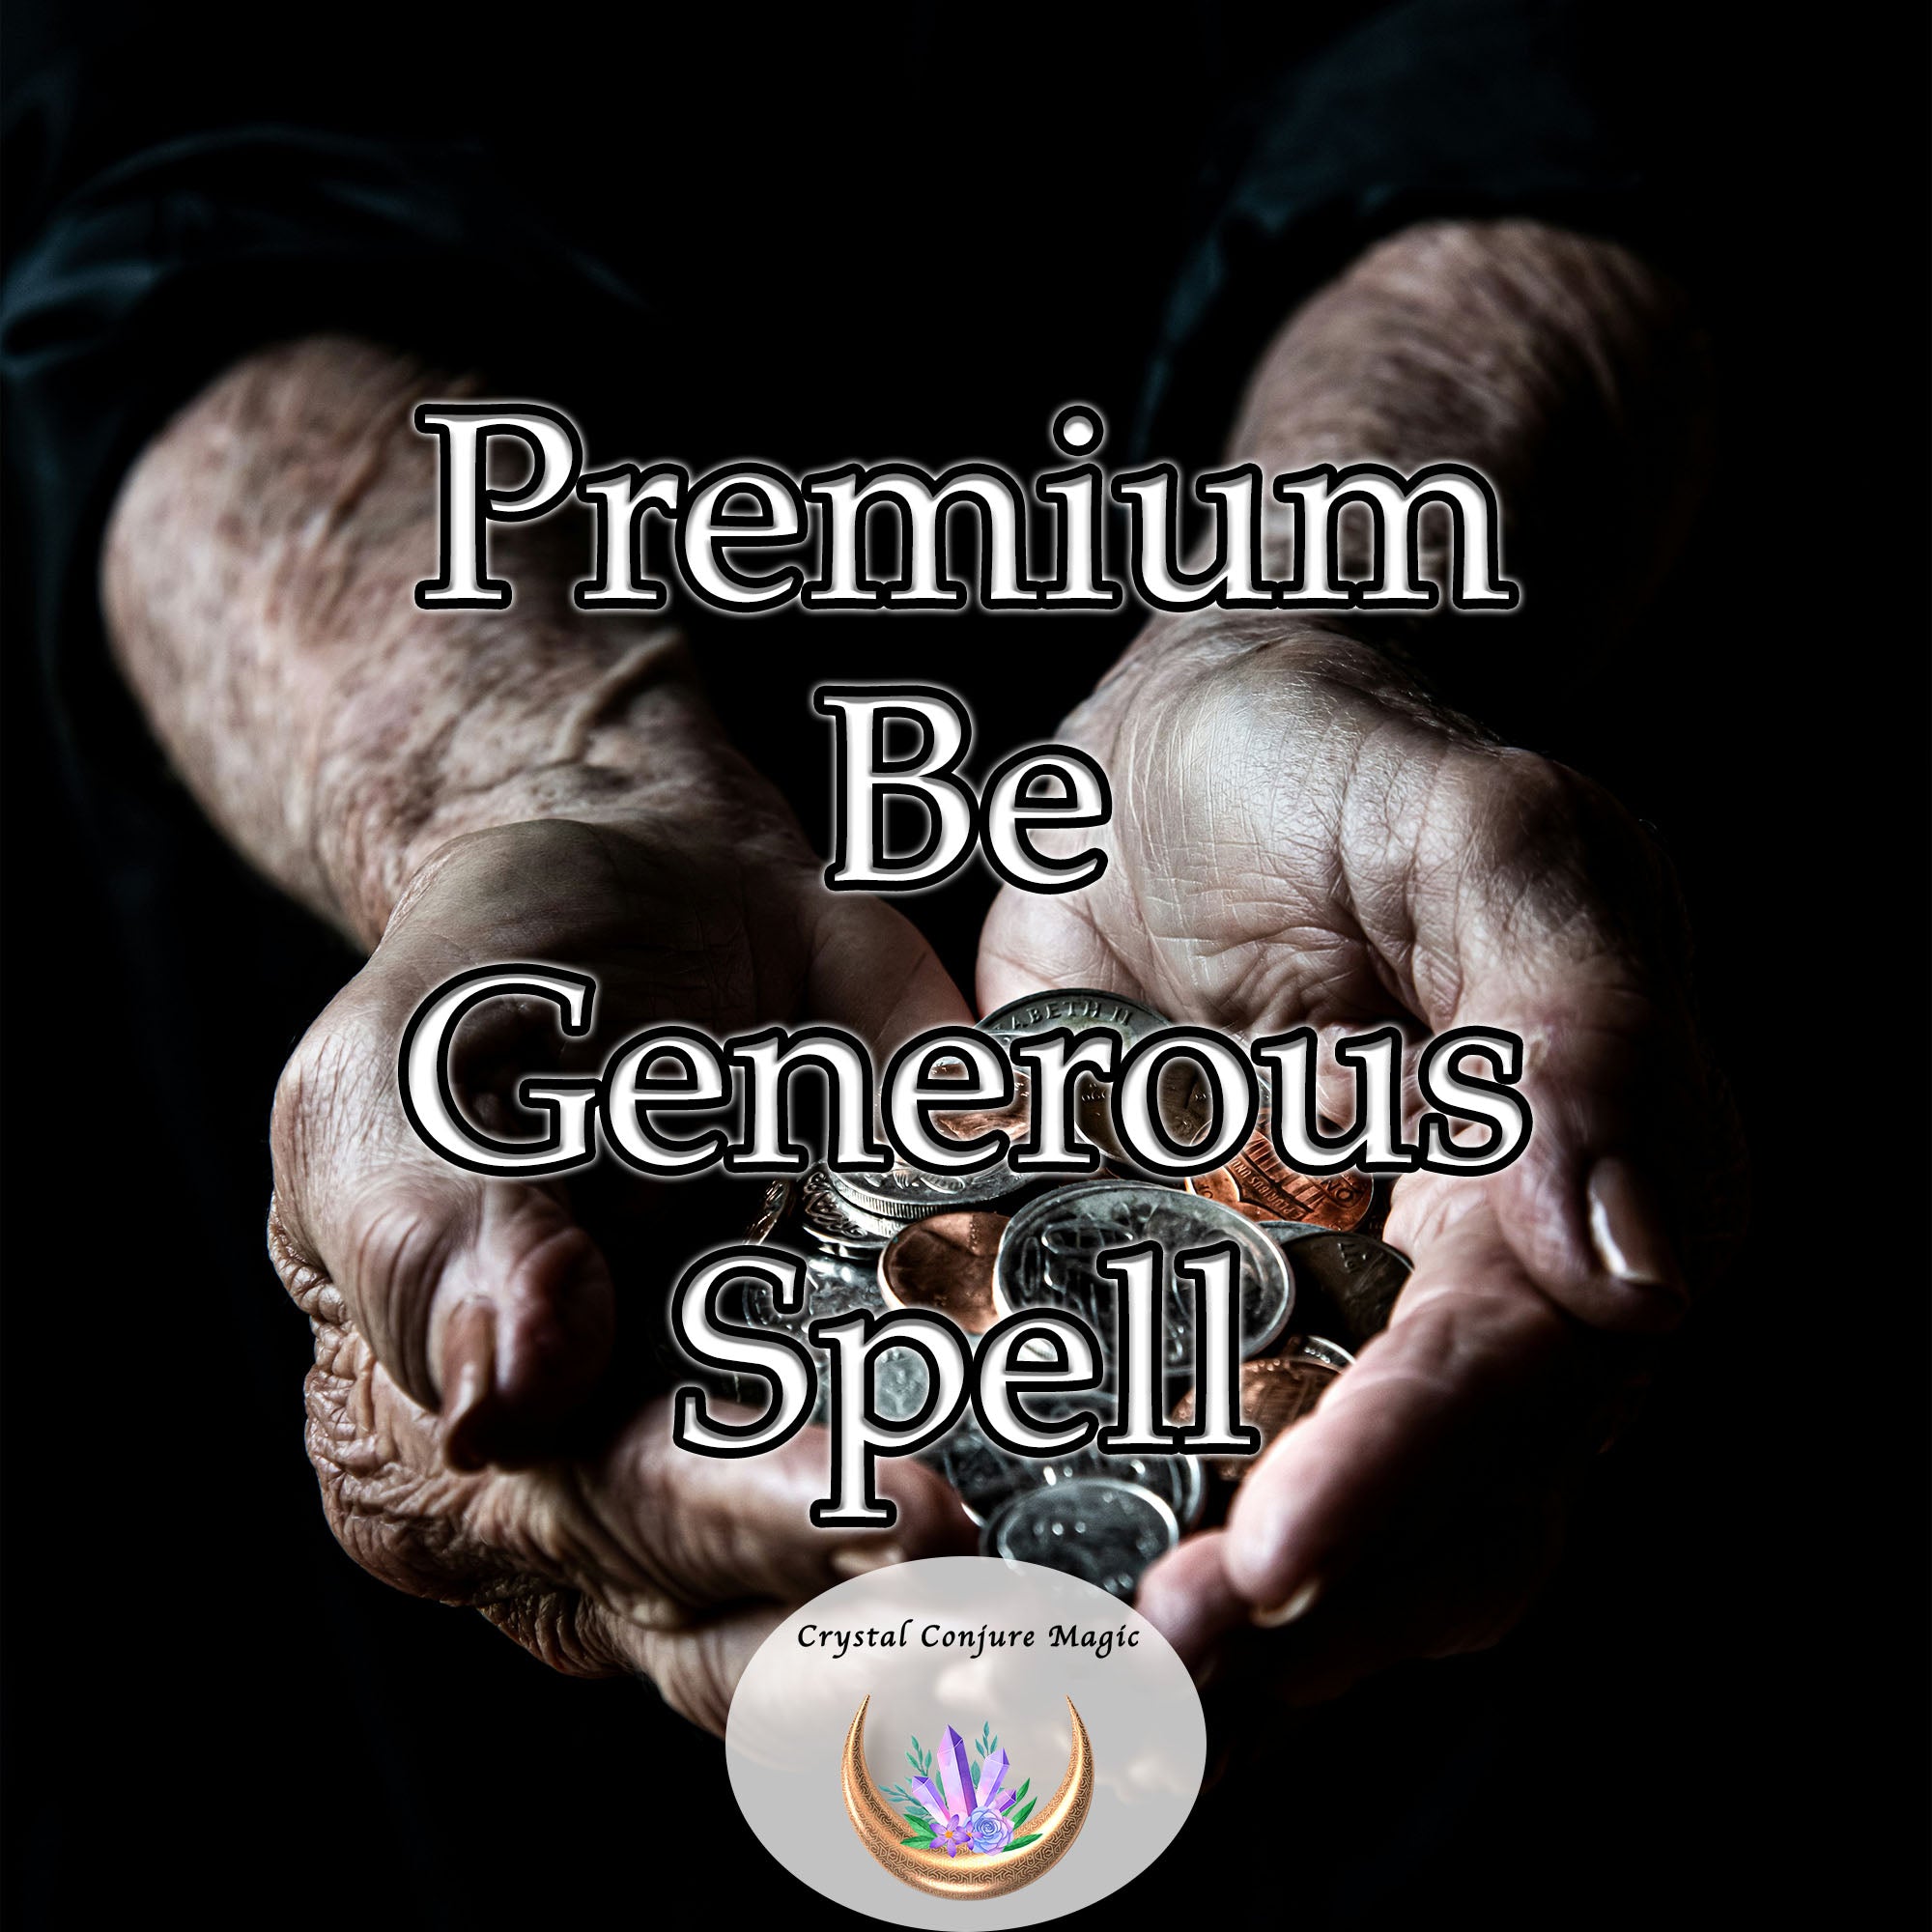 Premium Be Generous Spell - open your heart and mind to the joy of giv ...